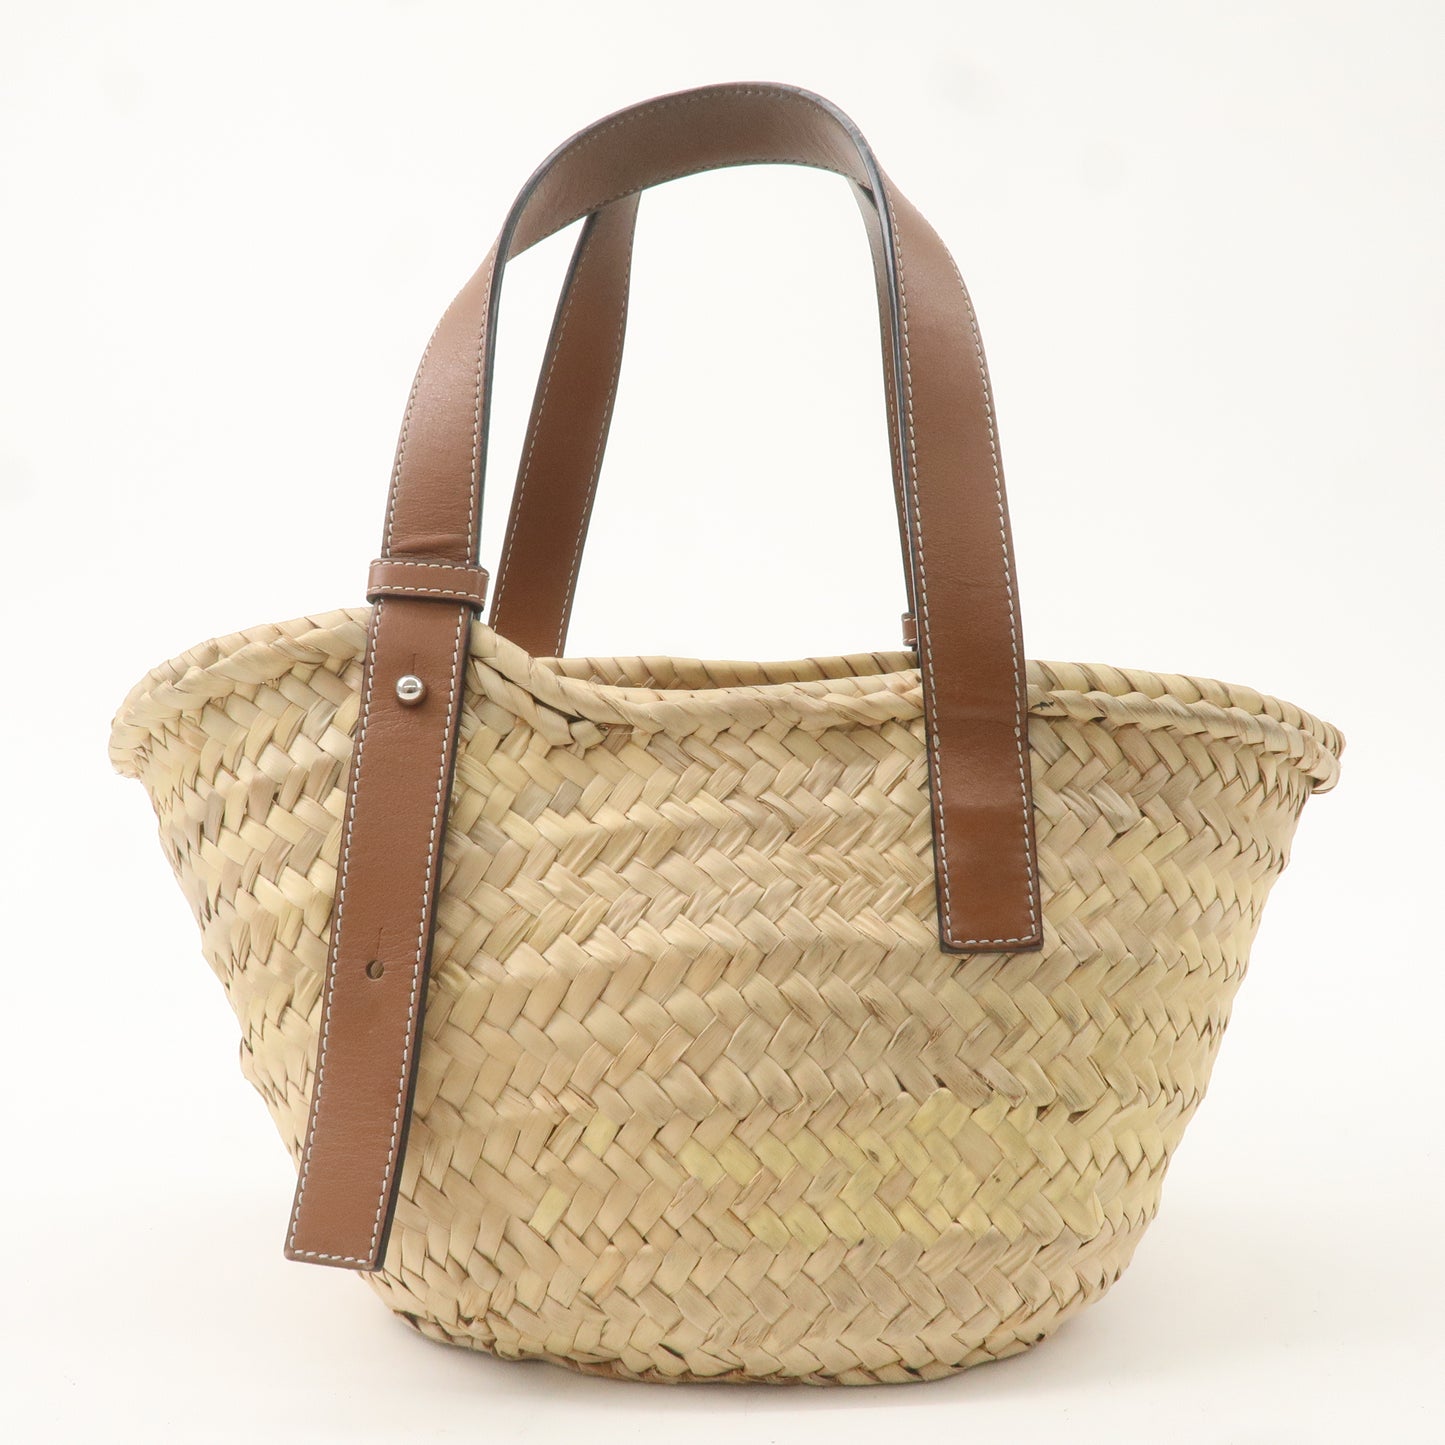 Authe LOEWE Palm Leaf Leather Basket Bag Small 327.02.S93 Natural Teint